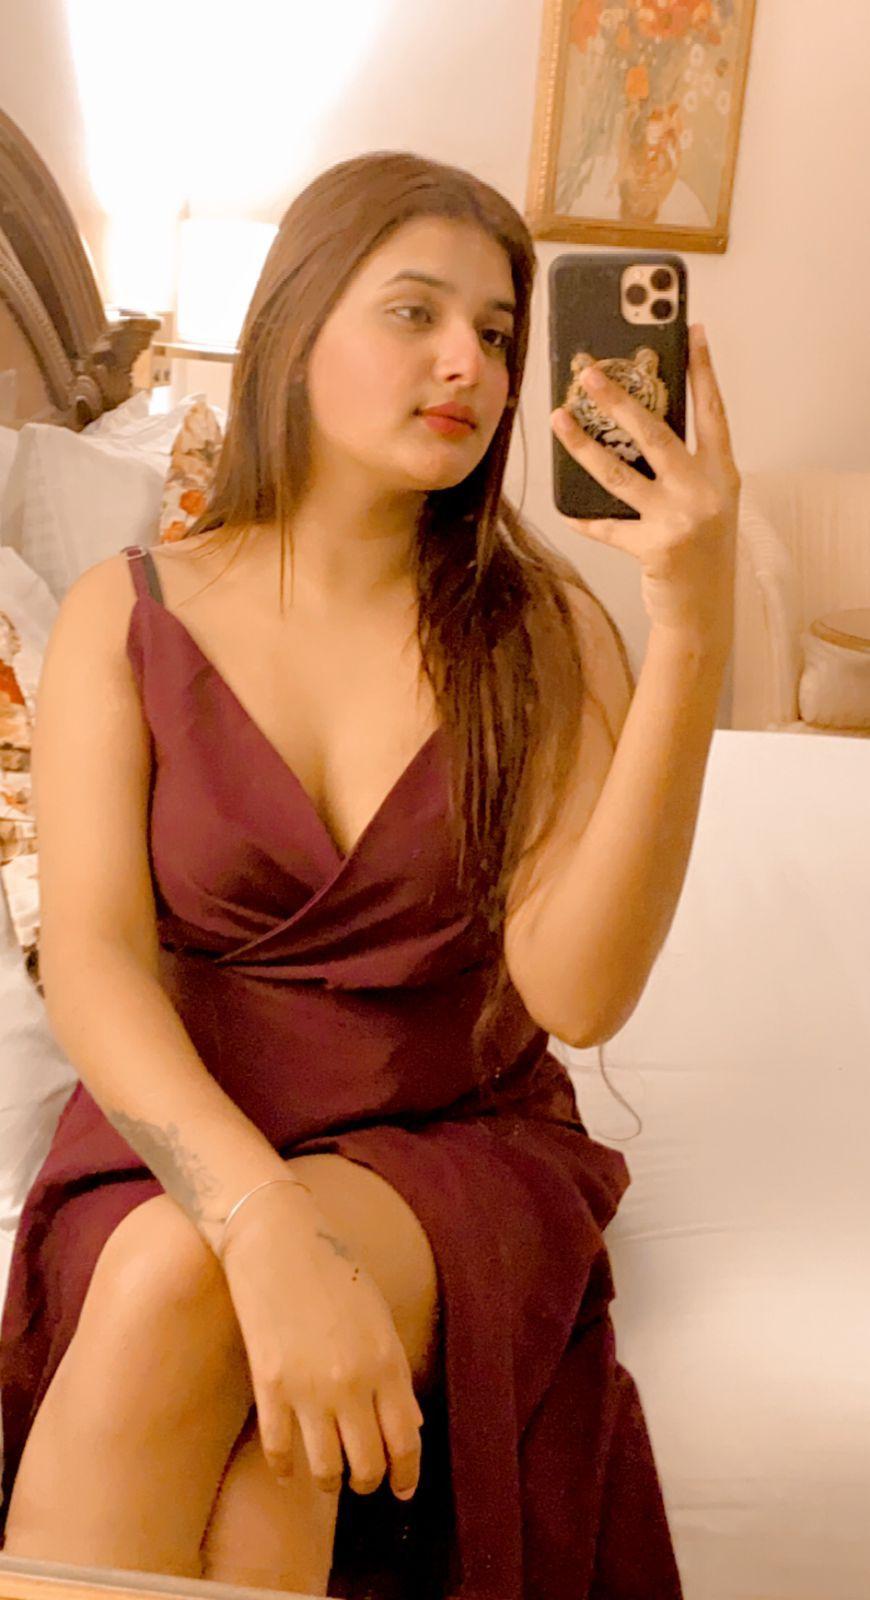 Today Booking Hot Female call girls in mumbai cash payment